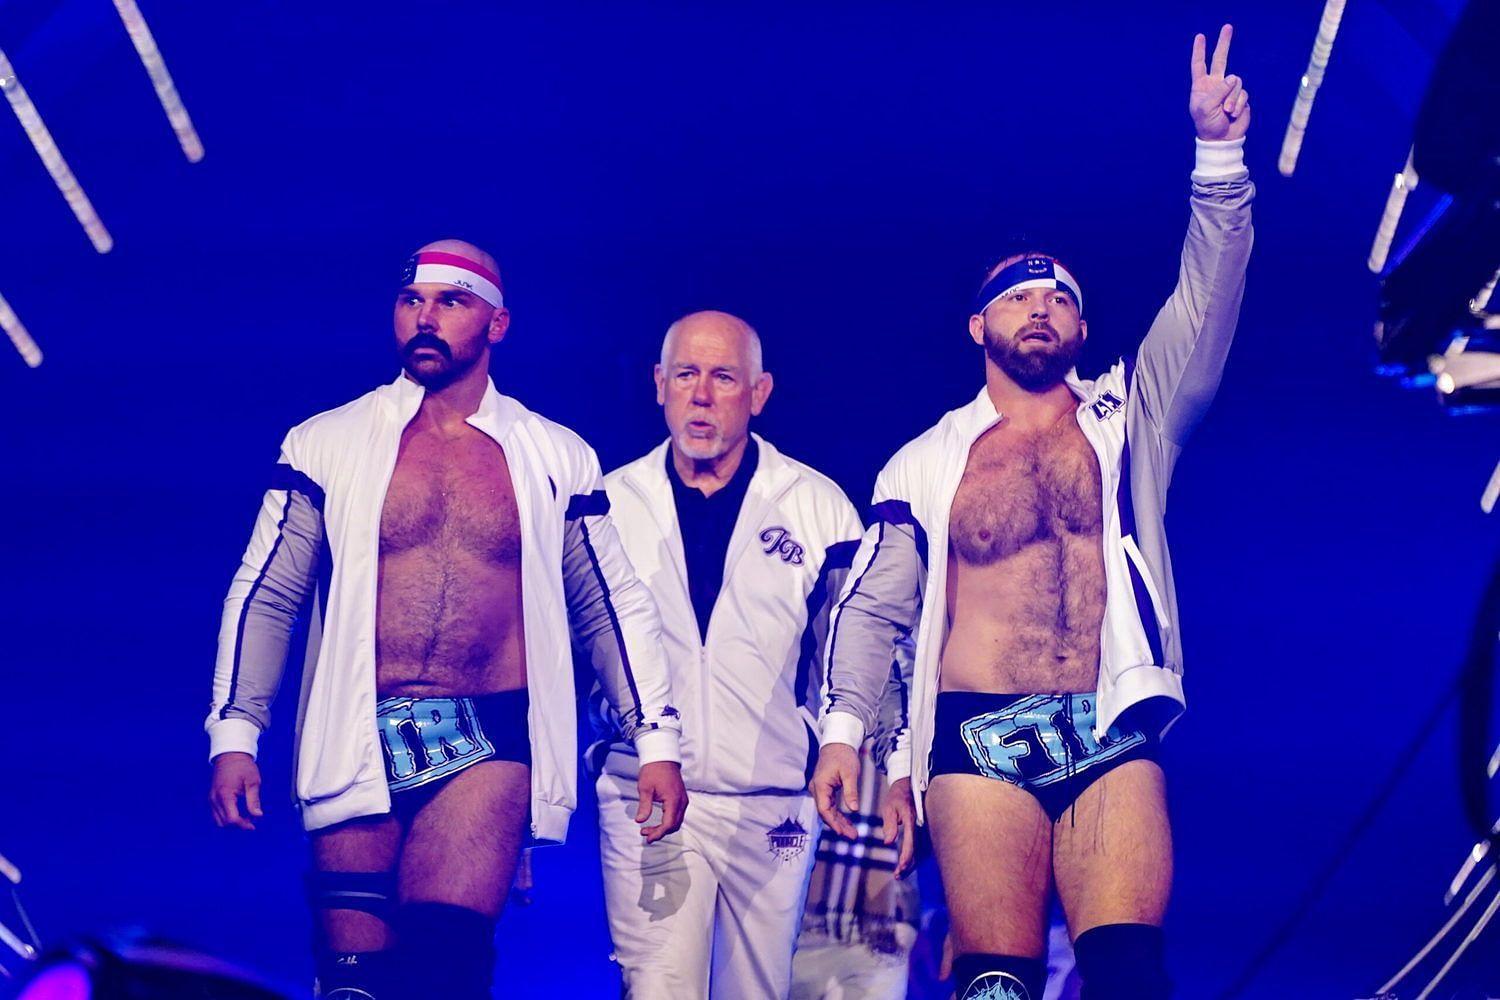 FTR making their AEW entrance with Tully Blanchard